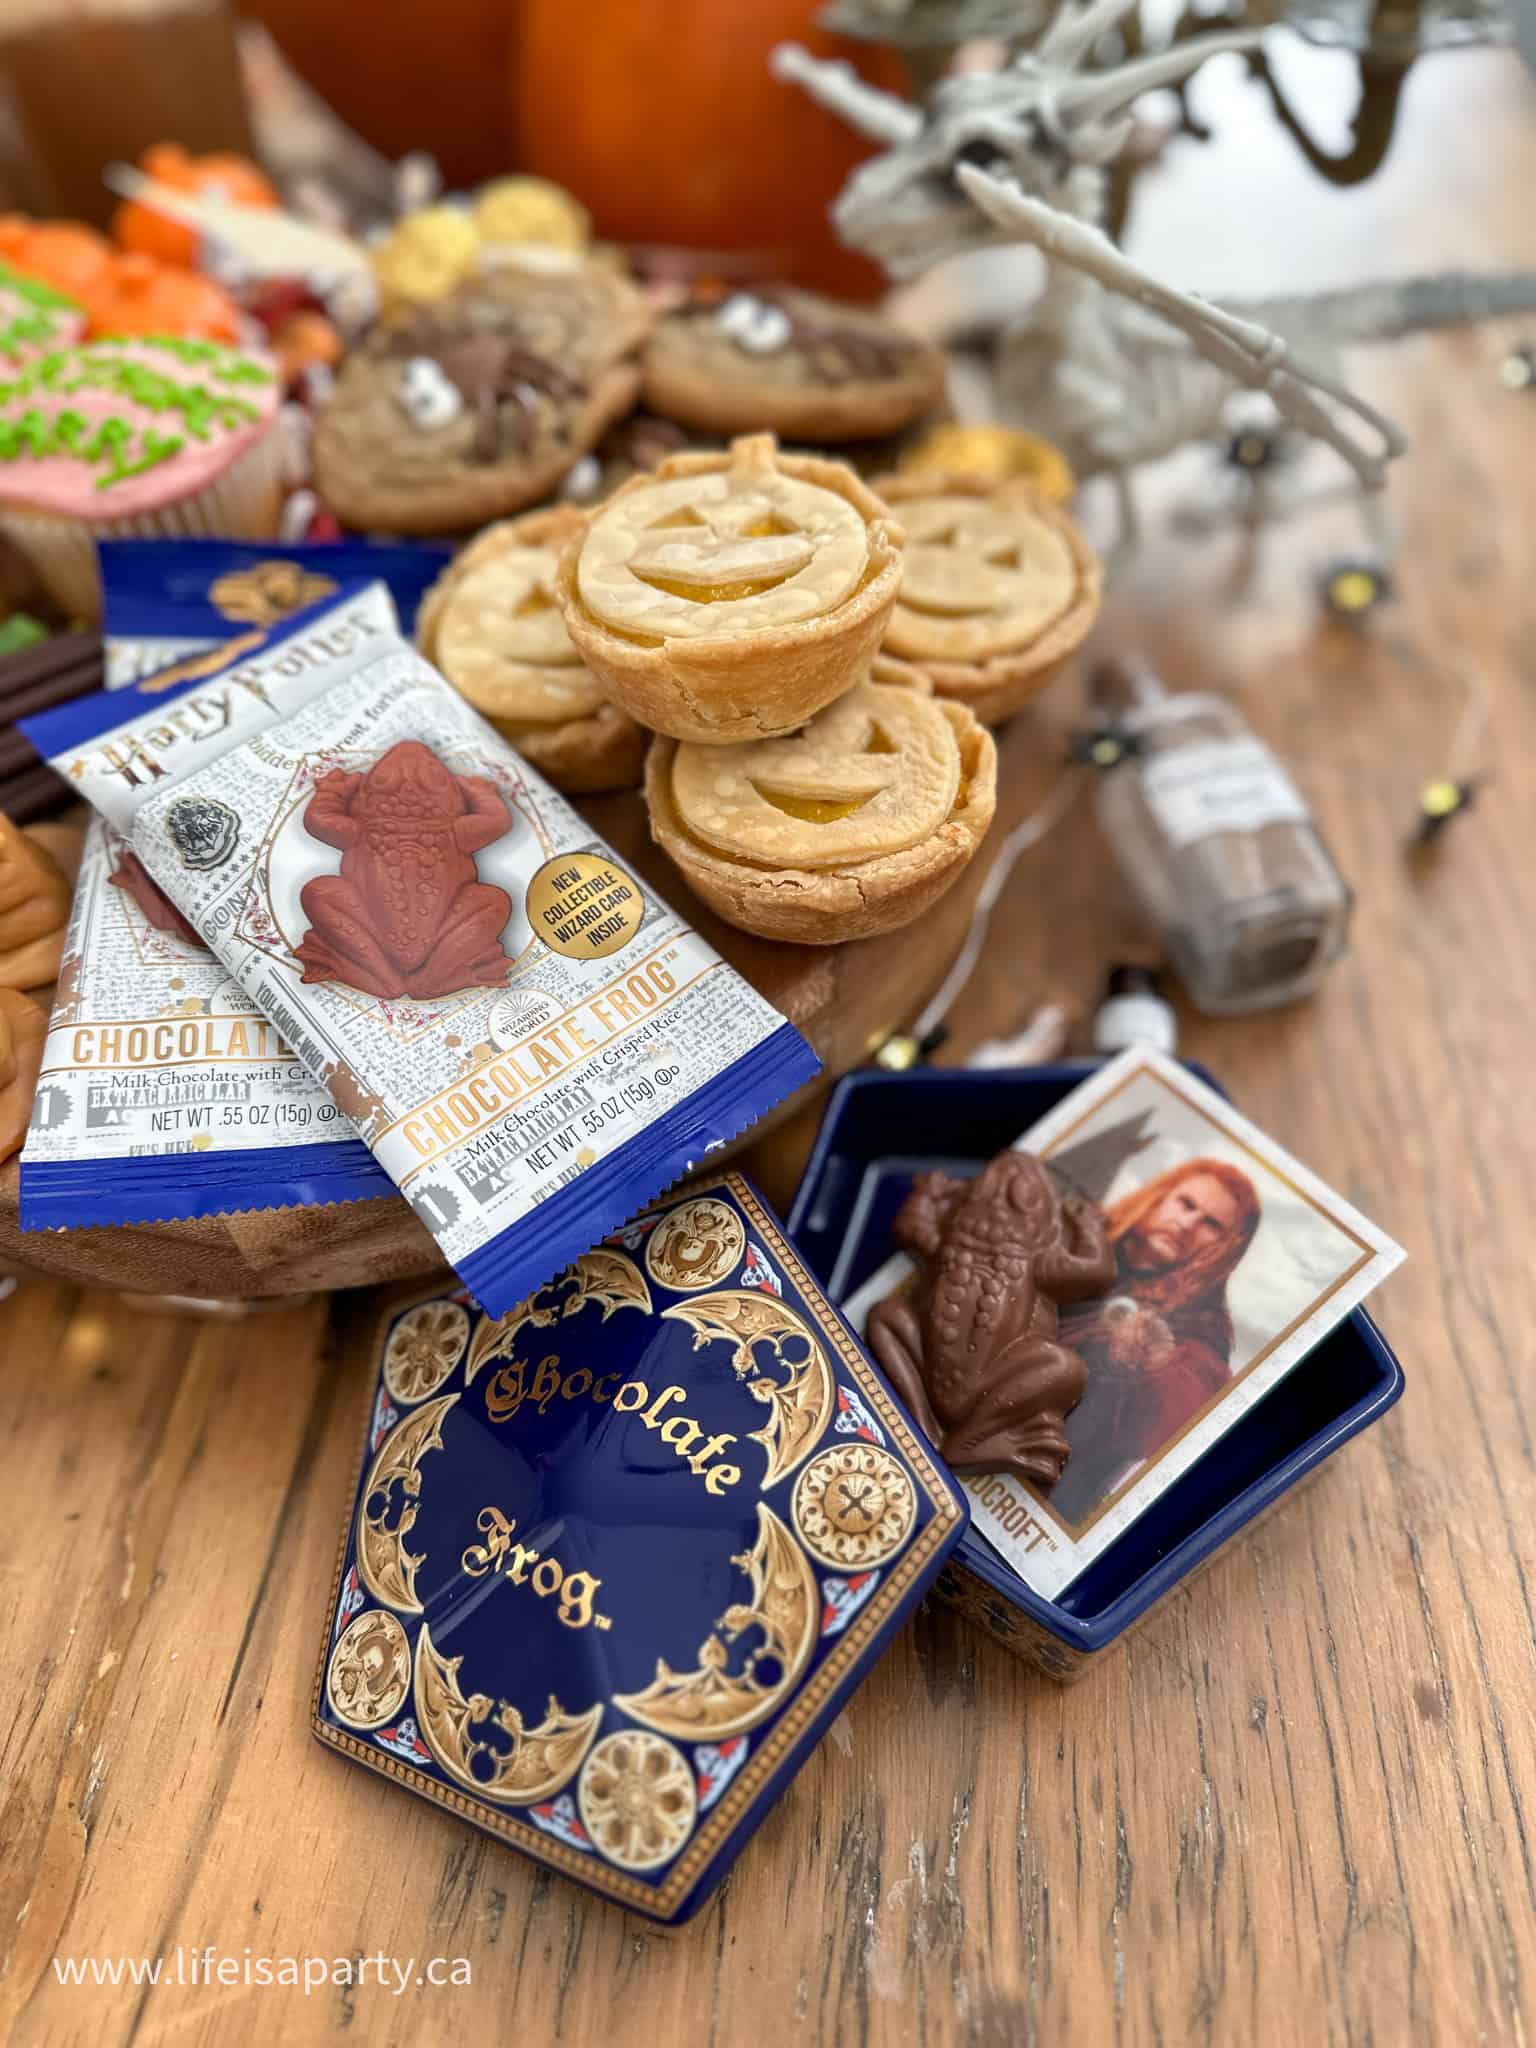 Harry Potter chocolate frog